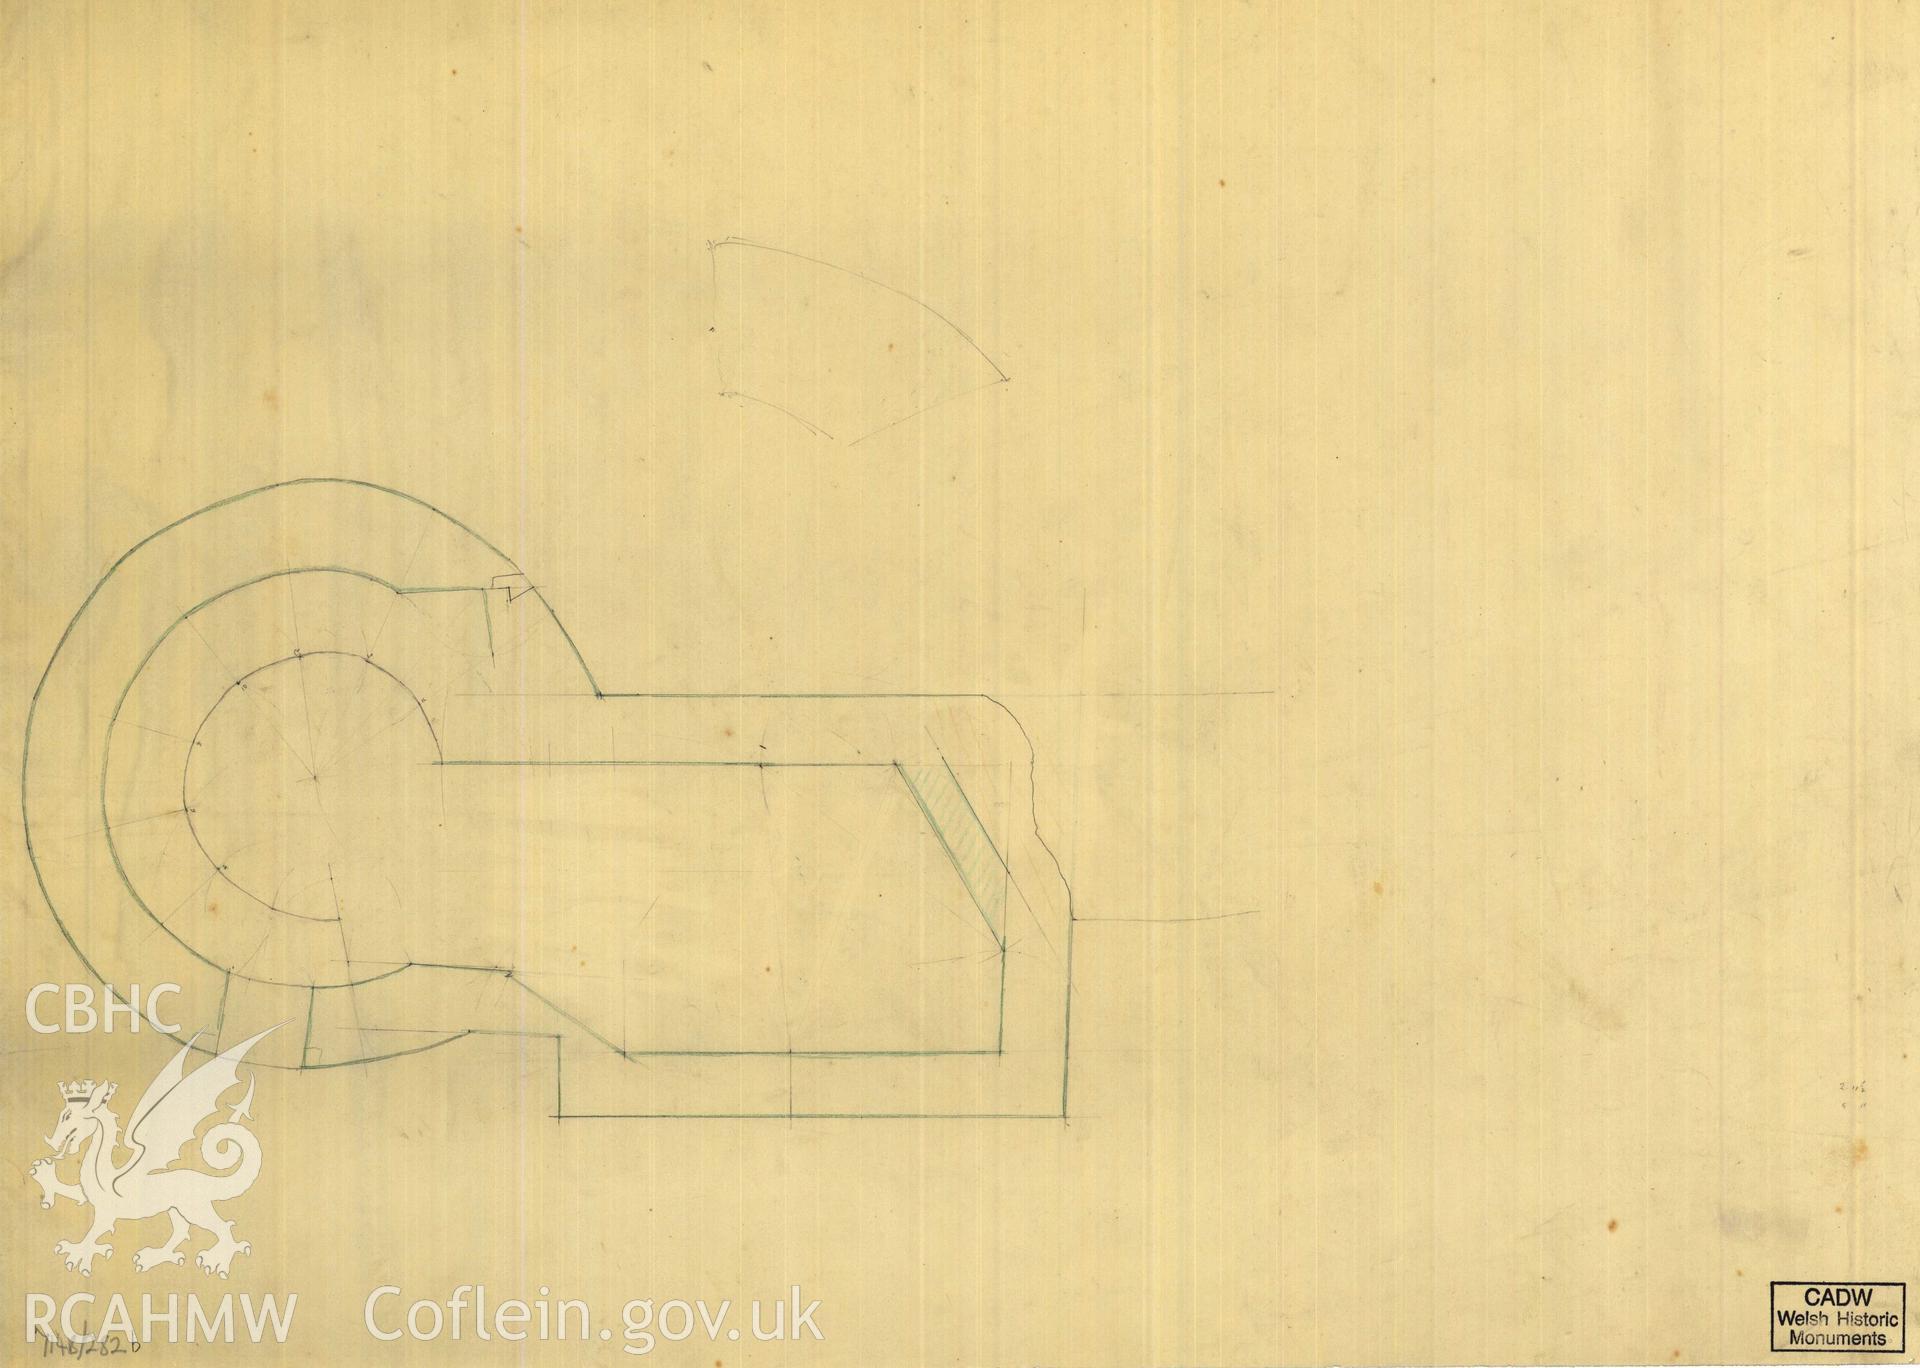 Cadw guardianship monument drawing of Caerphilly Castle. Inner E gate, S turret, lower. Cadw Ref. No:714B/282b. Scale 1:24.